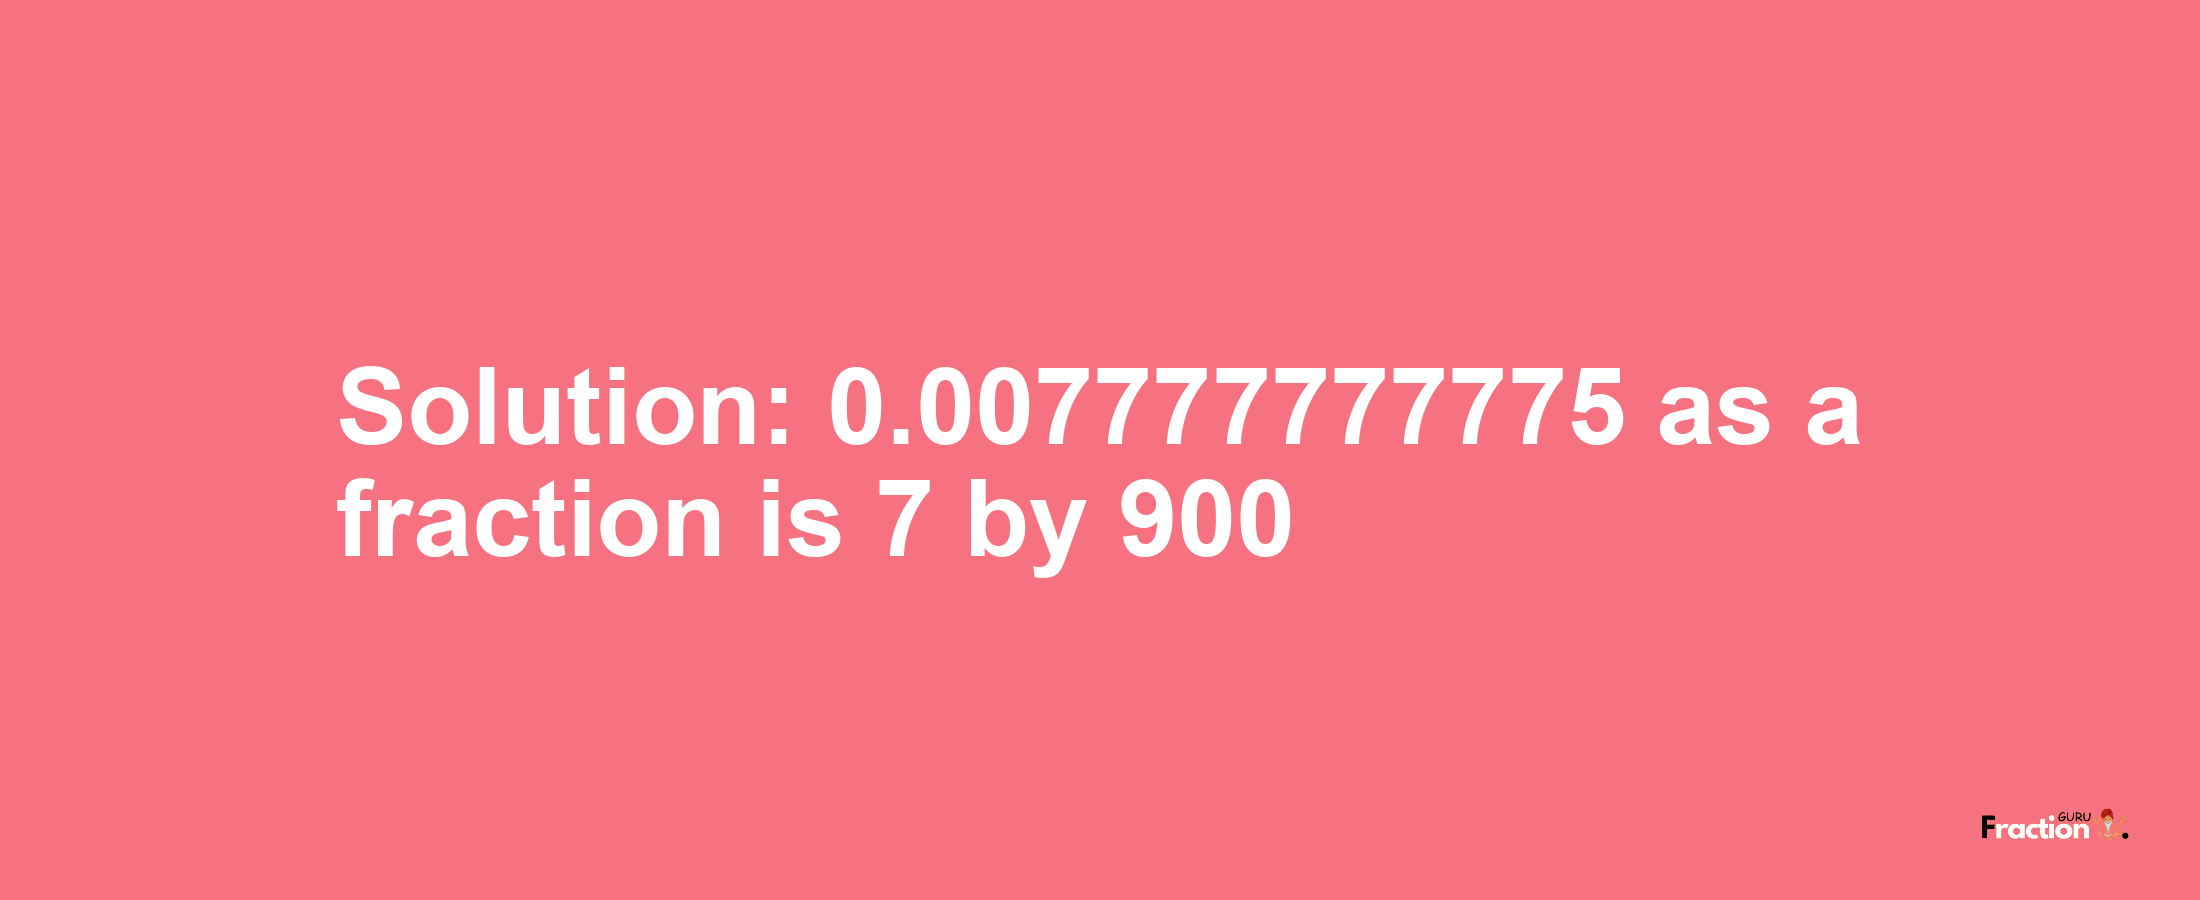 Solution:0.007777777775 as a fraction is 7/900